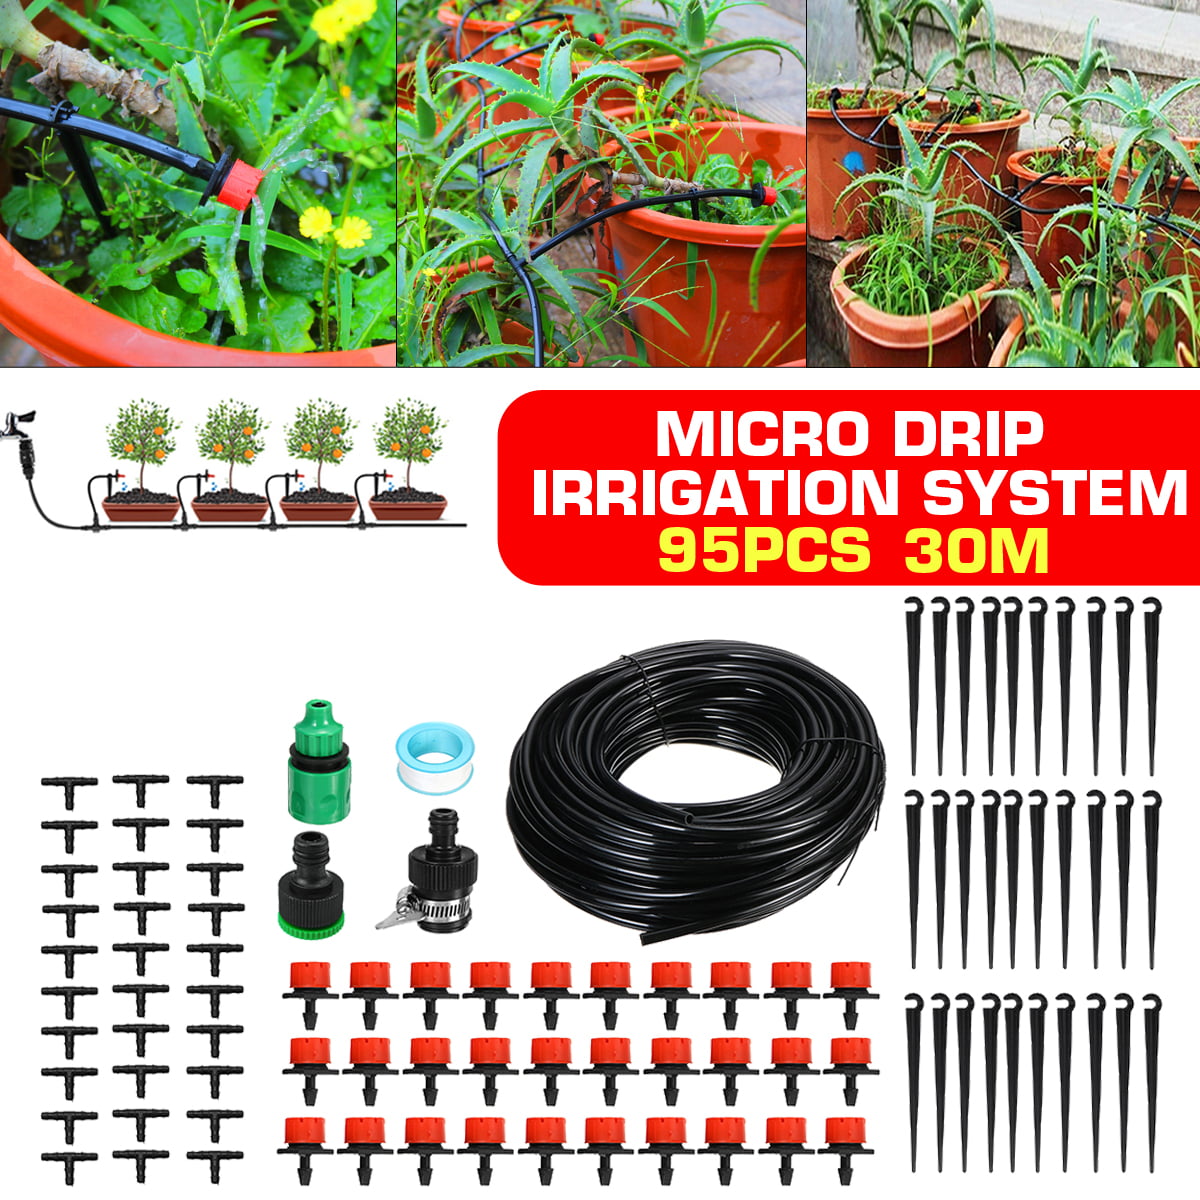 100Ft Drip Watering System Garden Plant Lawn Water Irrigation Kit Tubing Hose 